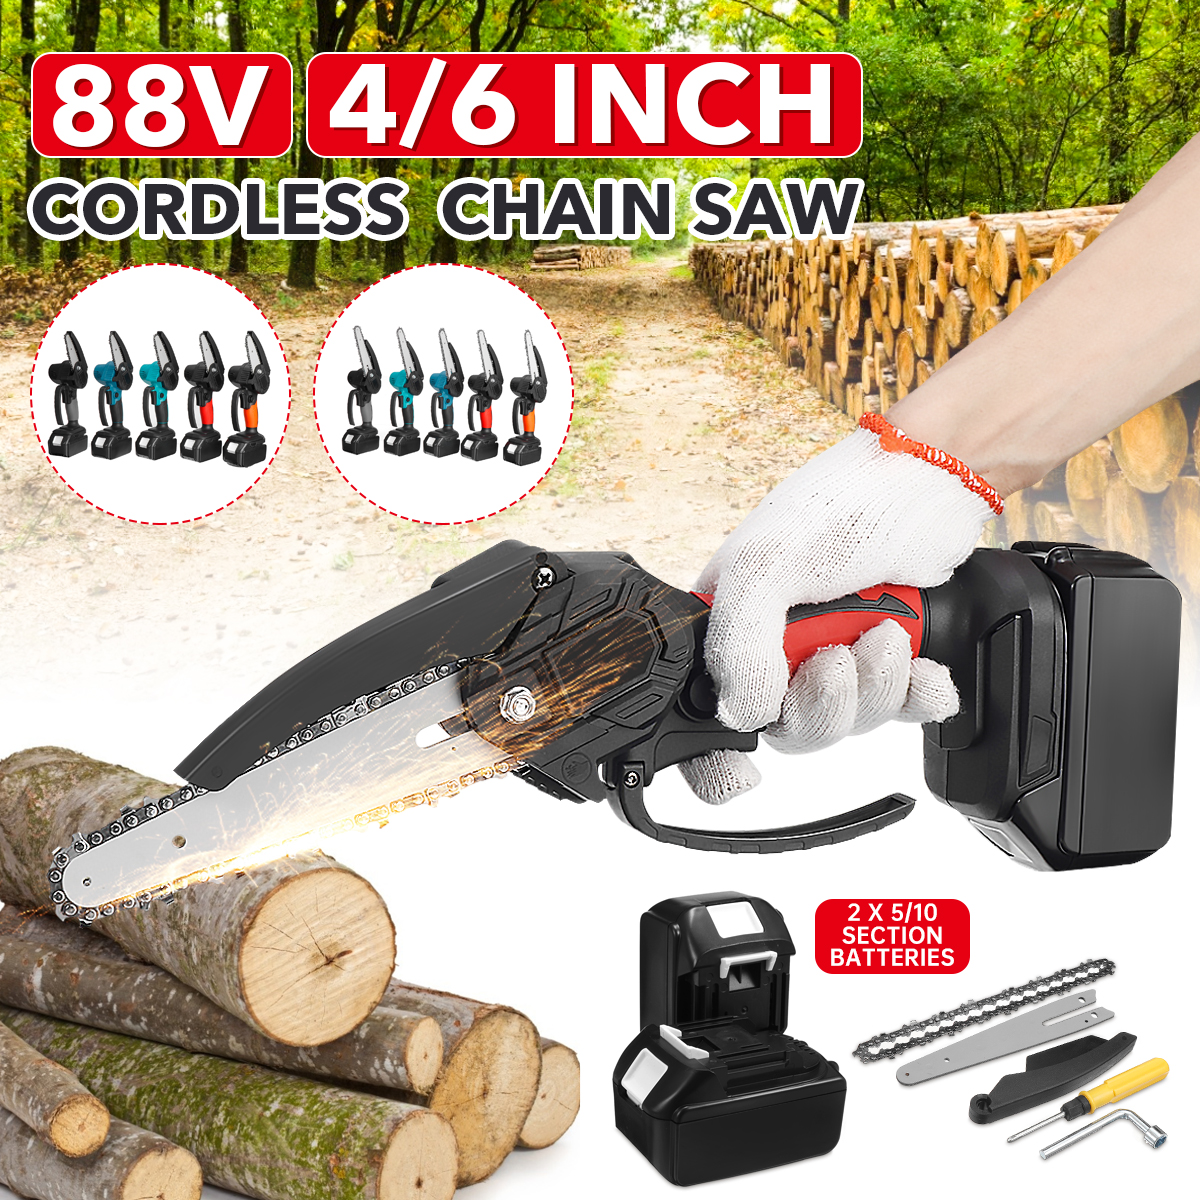 88VF-46-Inch-Cordless-Electric-Chain-Saw-Kit-One-Hand-Saw-Mini-Portable-Woodworking-Wood-Cutter-W-2p-1880983-1